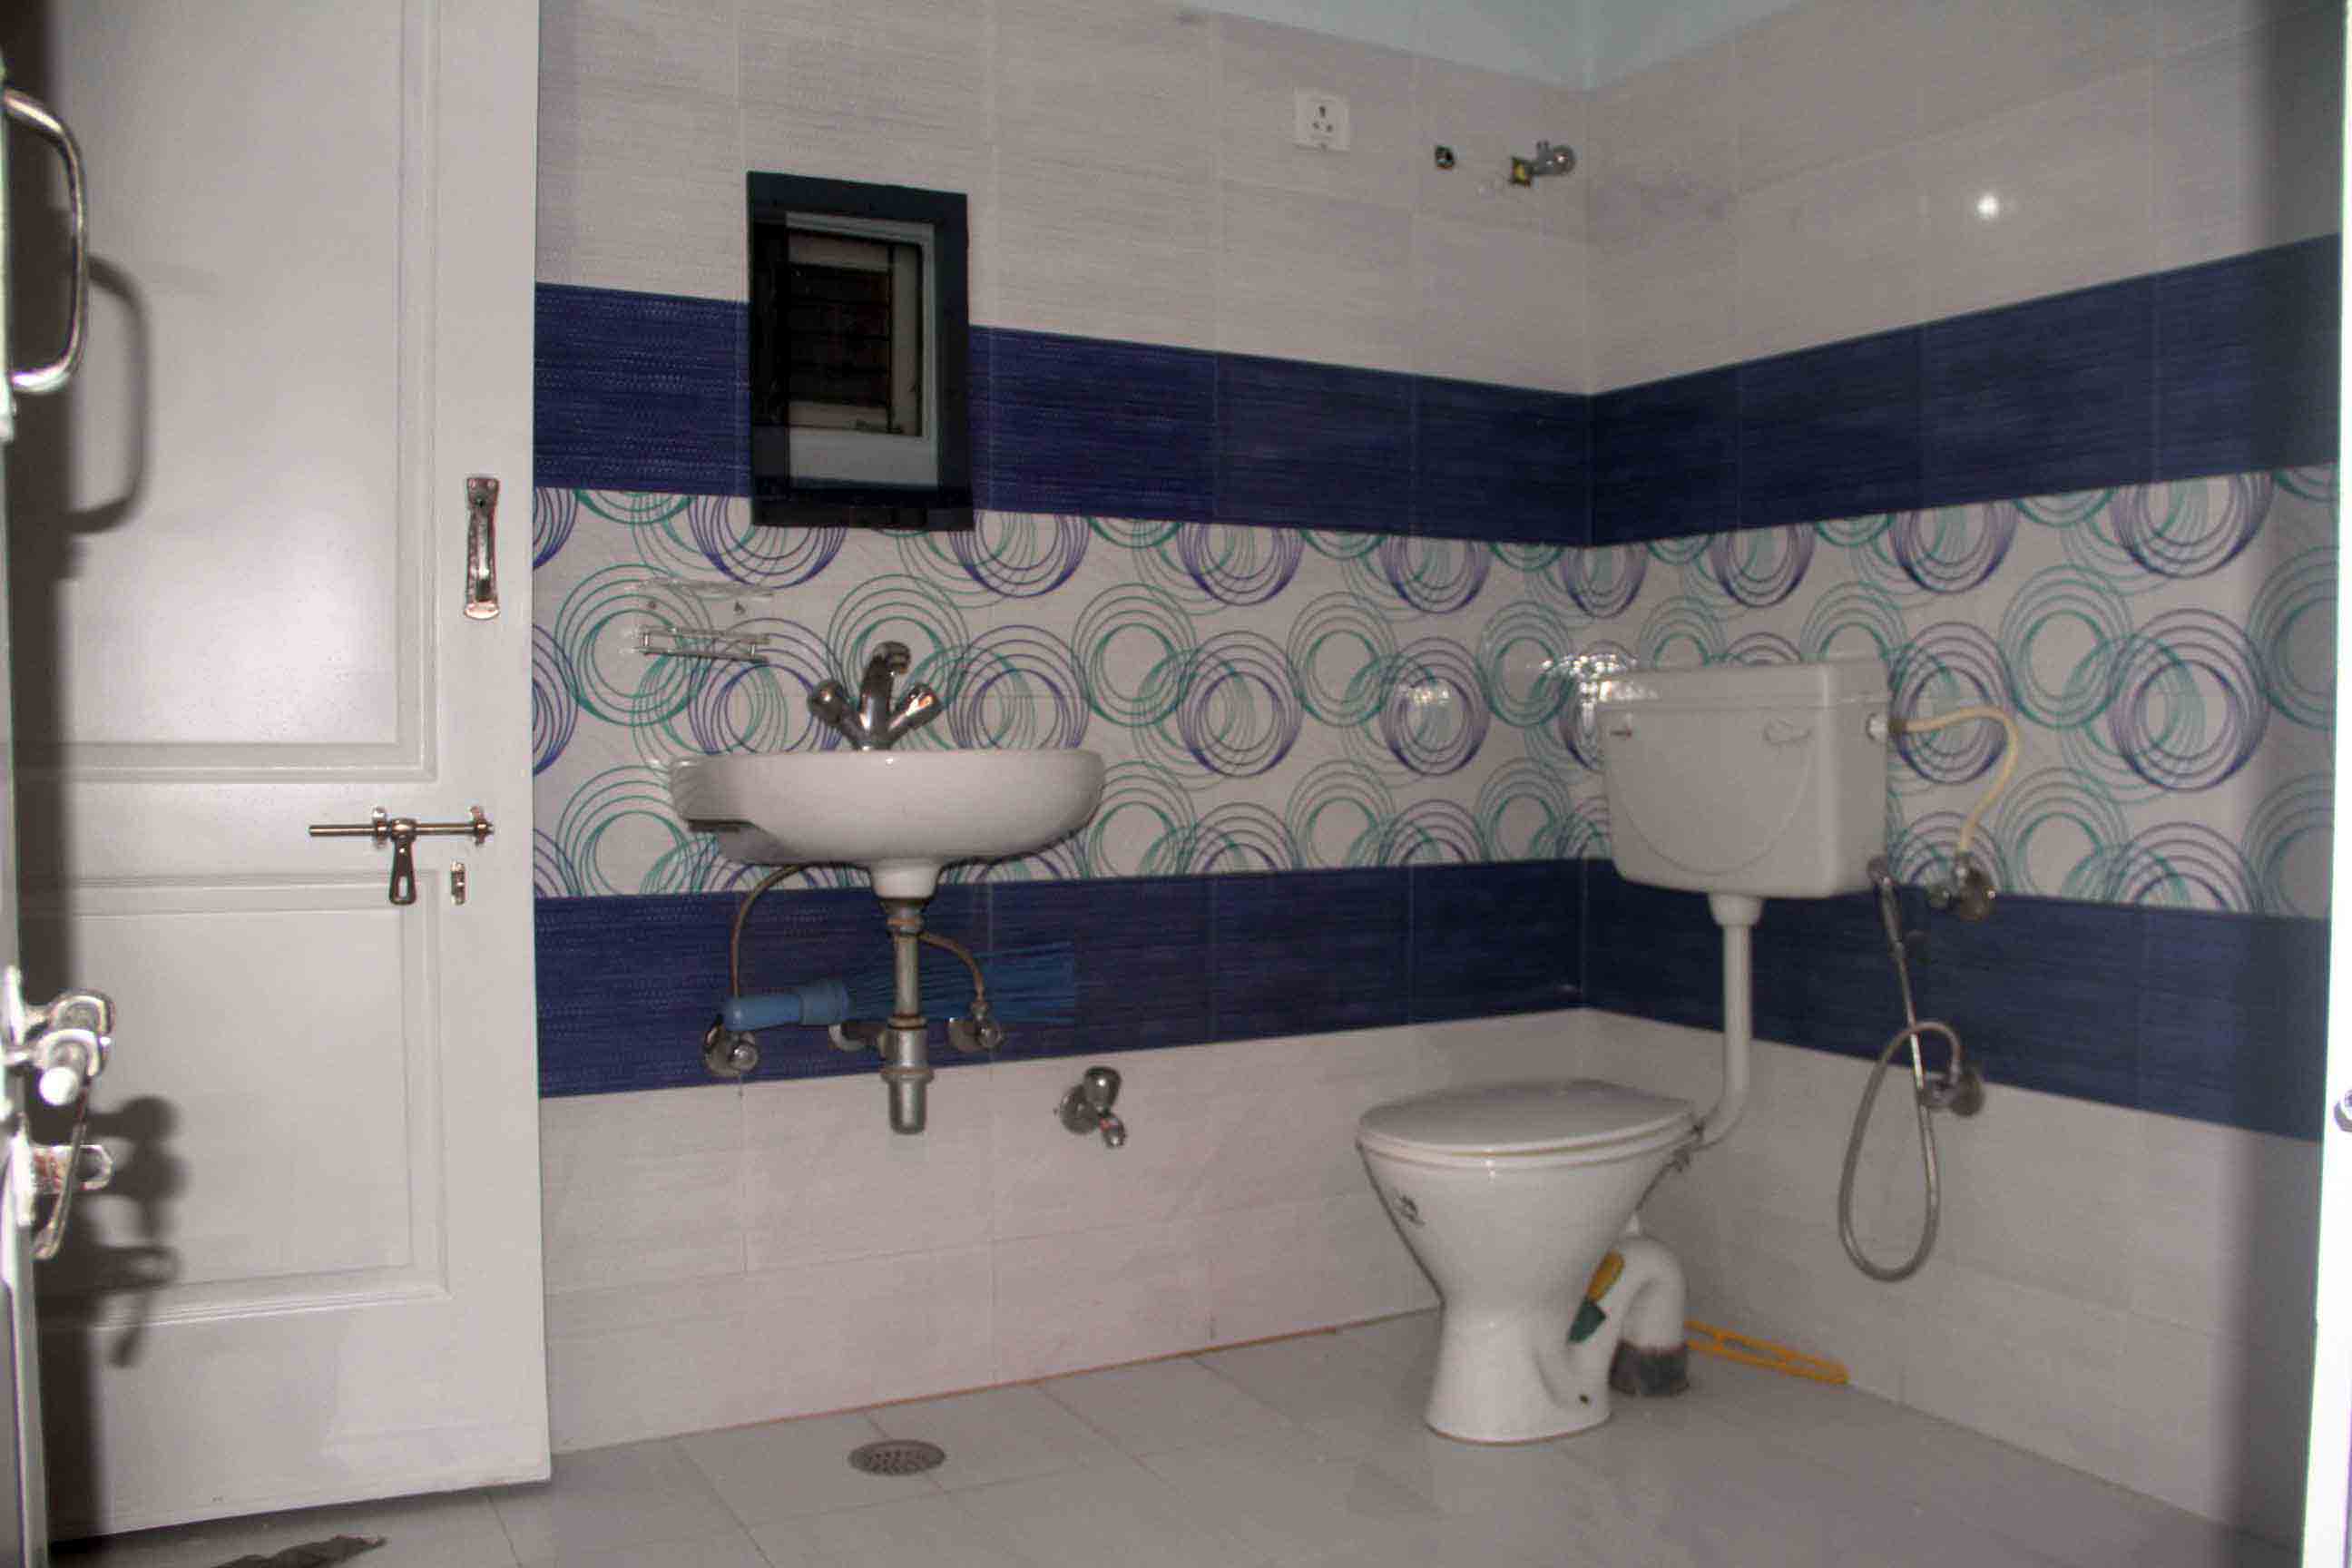 2197Toilet from Hall & Room1 view 2.jpg